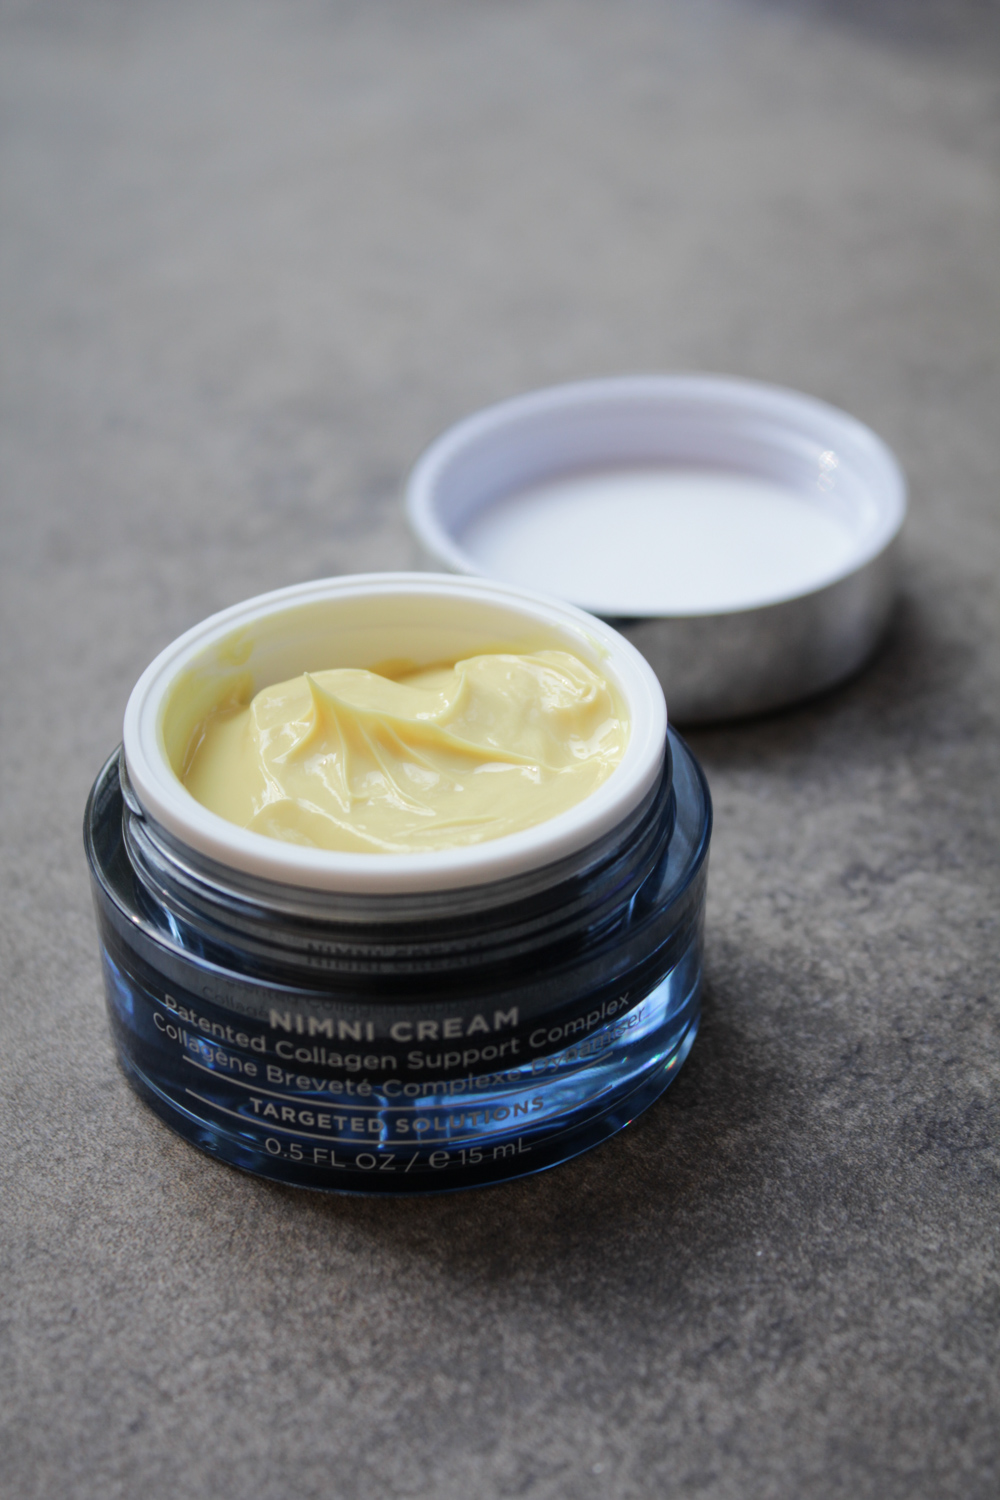 Favorite fall beauty products - Nimni Cream from HydroPeptide 